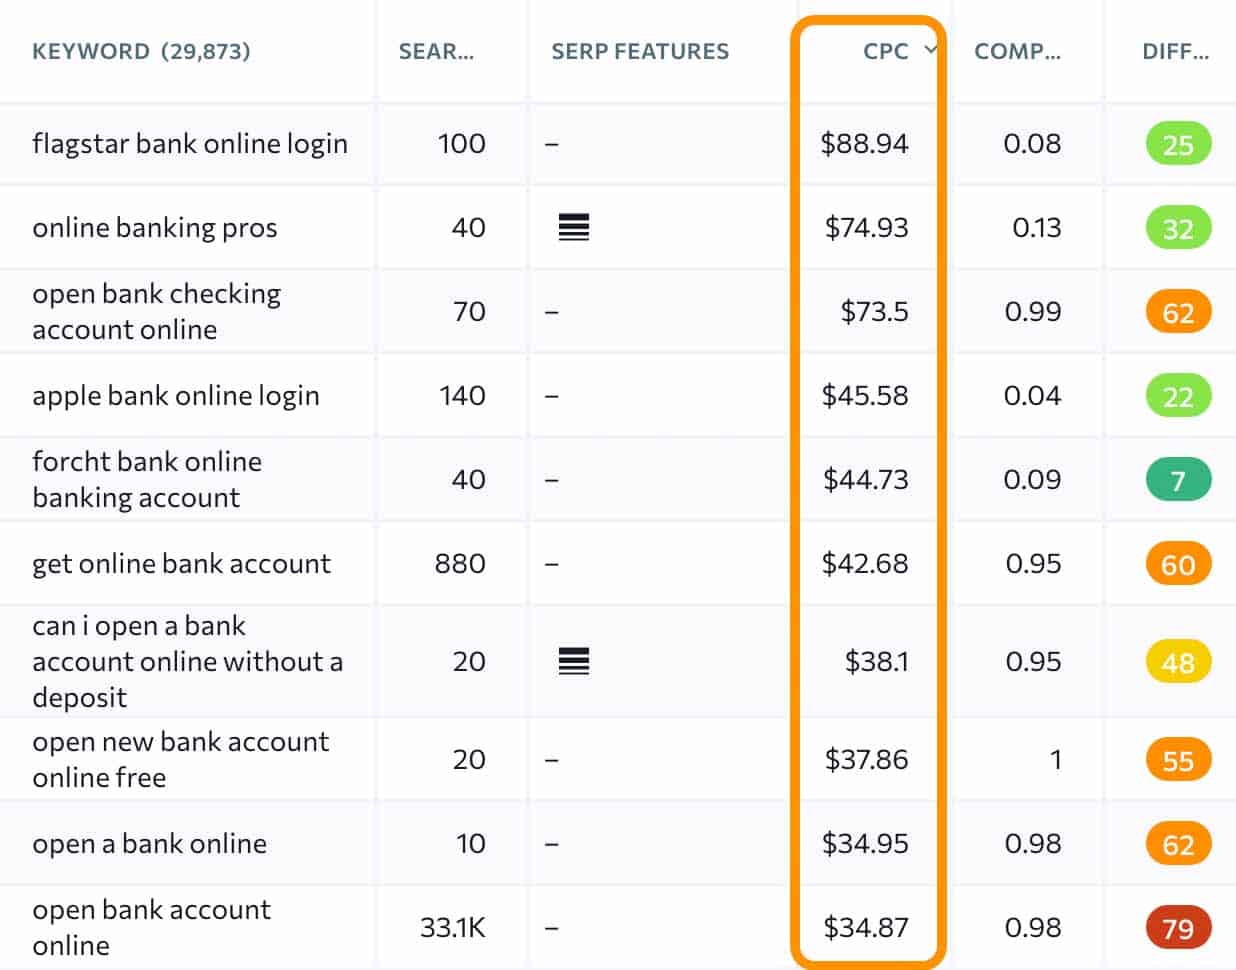 Top Paying Keywords For The Online Banking Niche